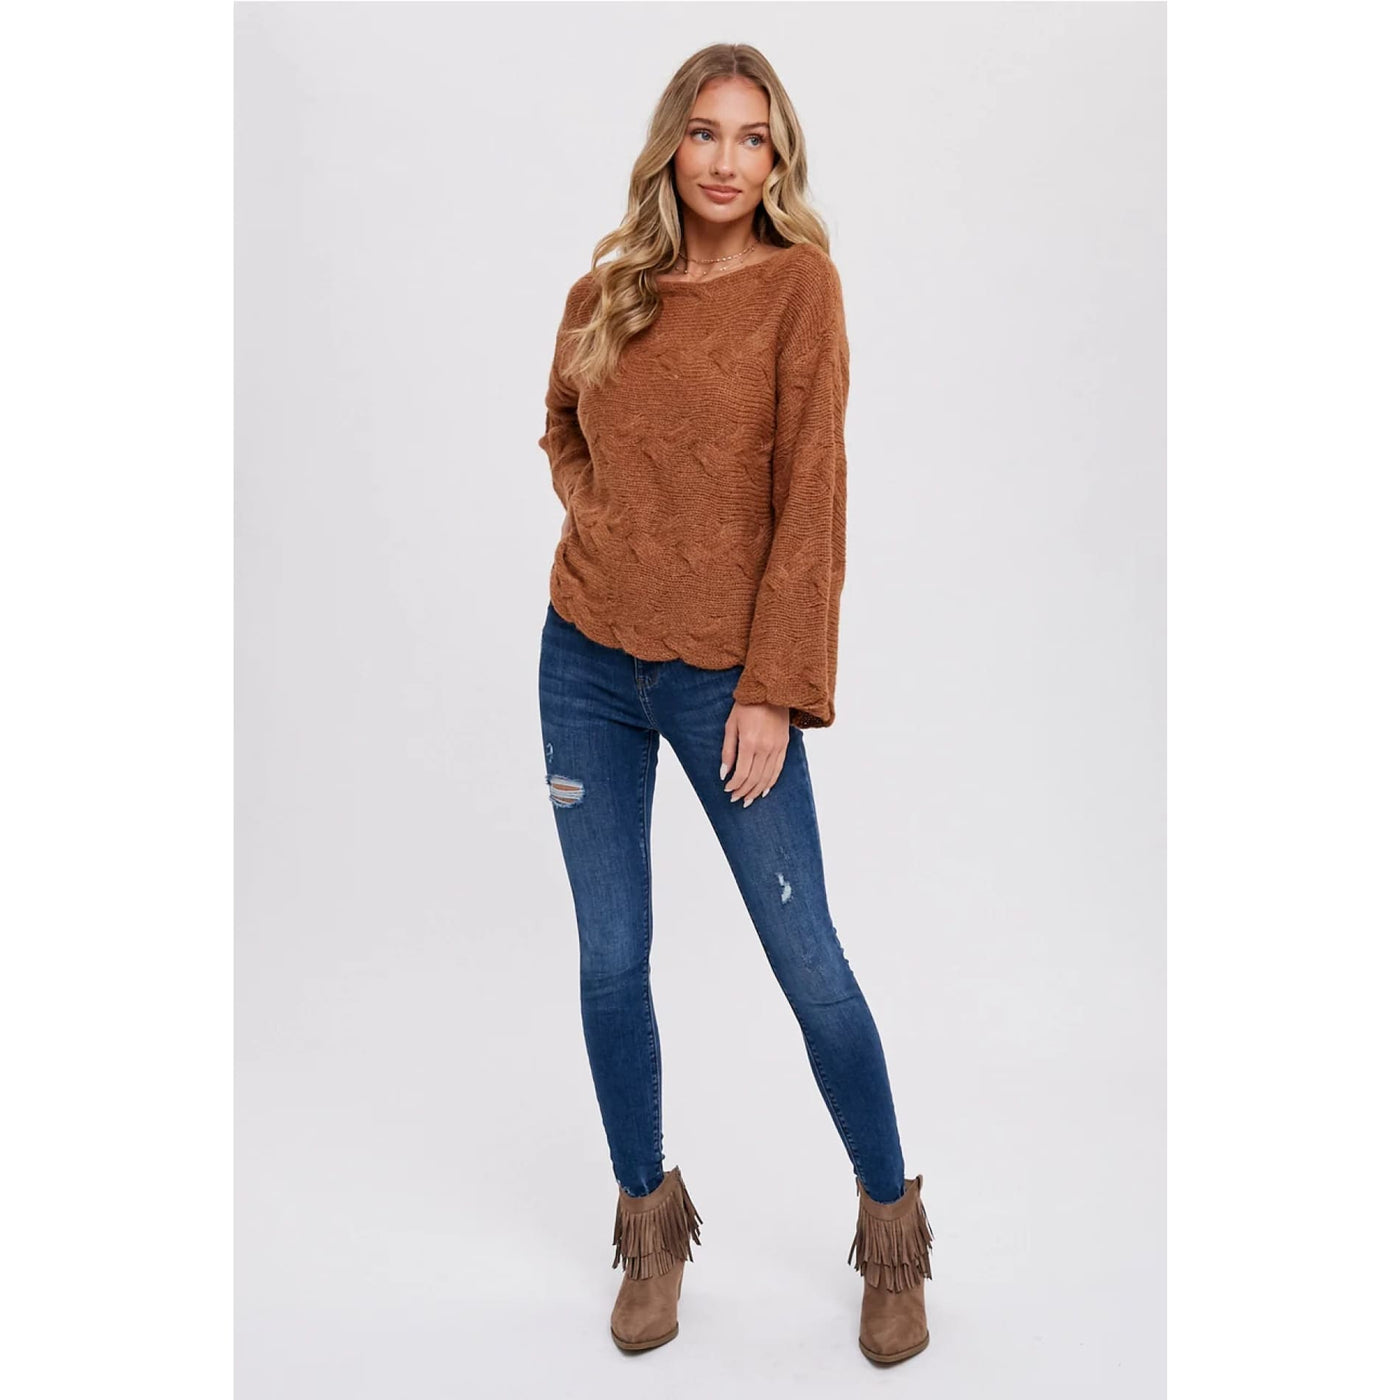 Doing Just Fine Sweater - 130 Sweaters/Cardigans